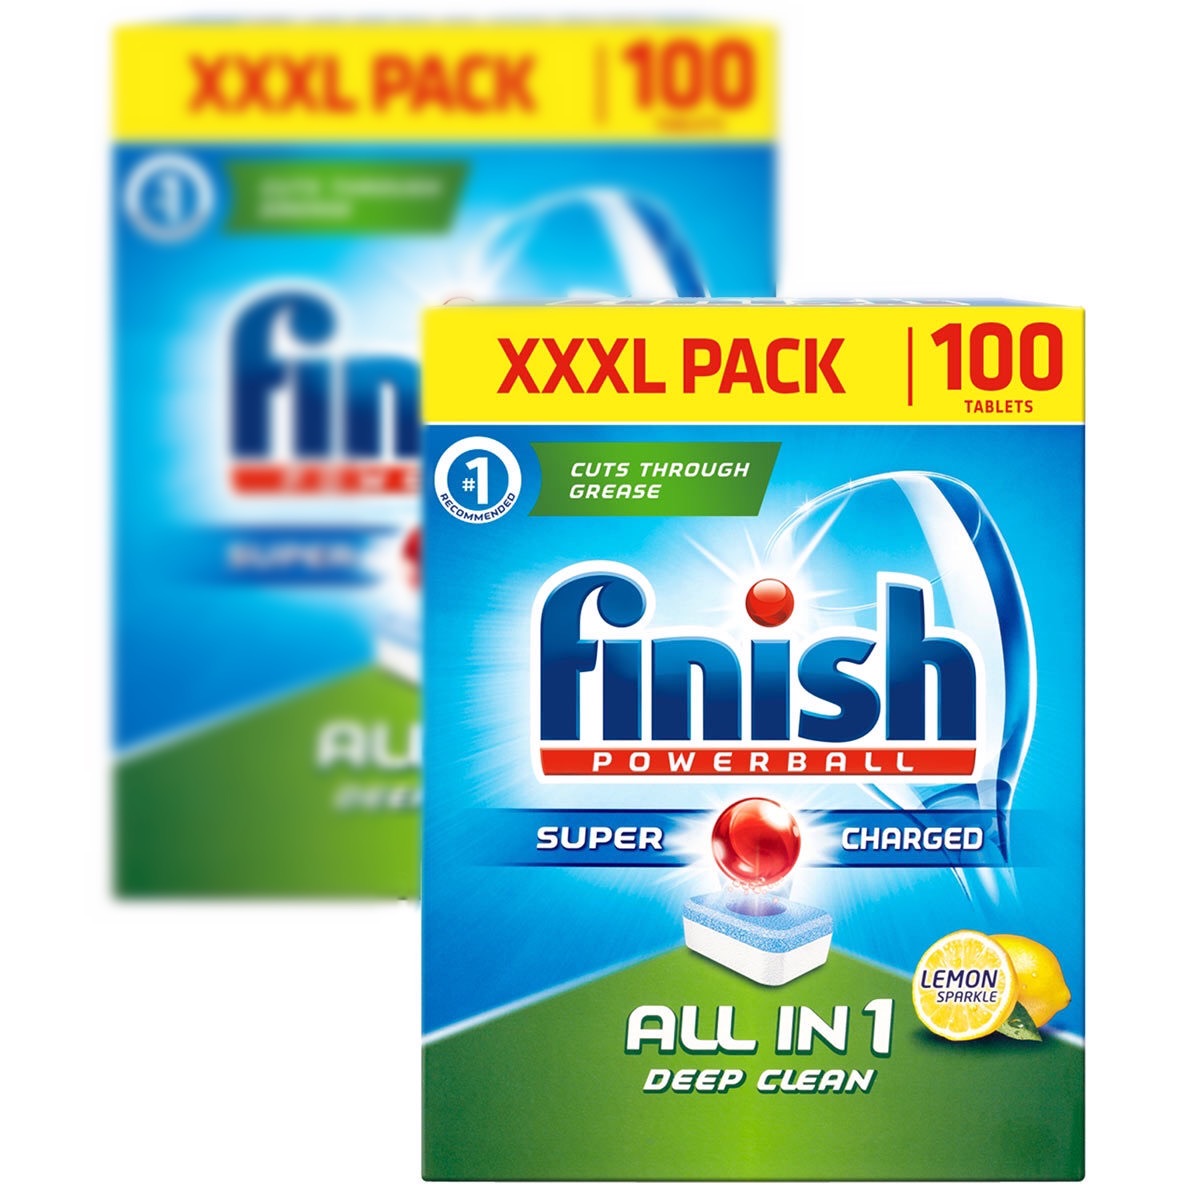 Dishwasher Tablets XXXL, All in One Deep Clean, Finish Powerball